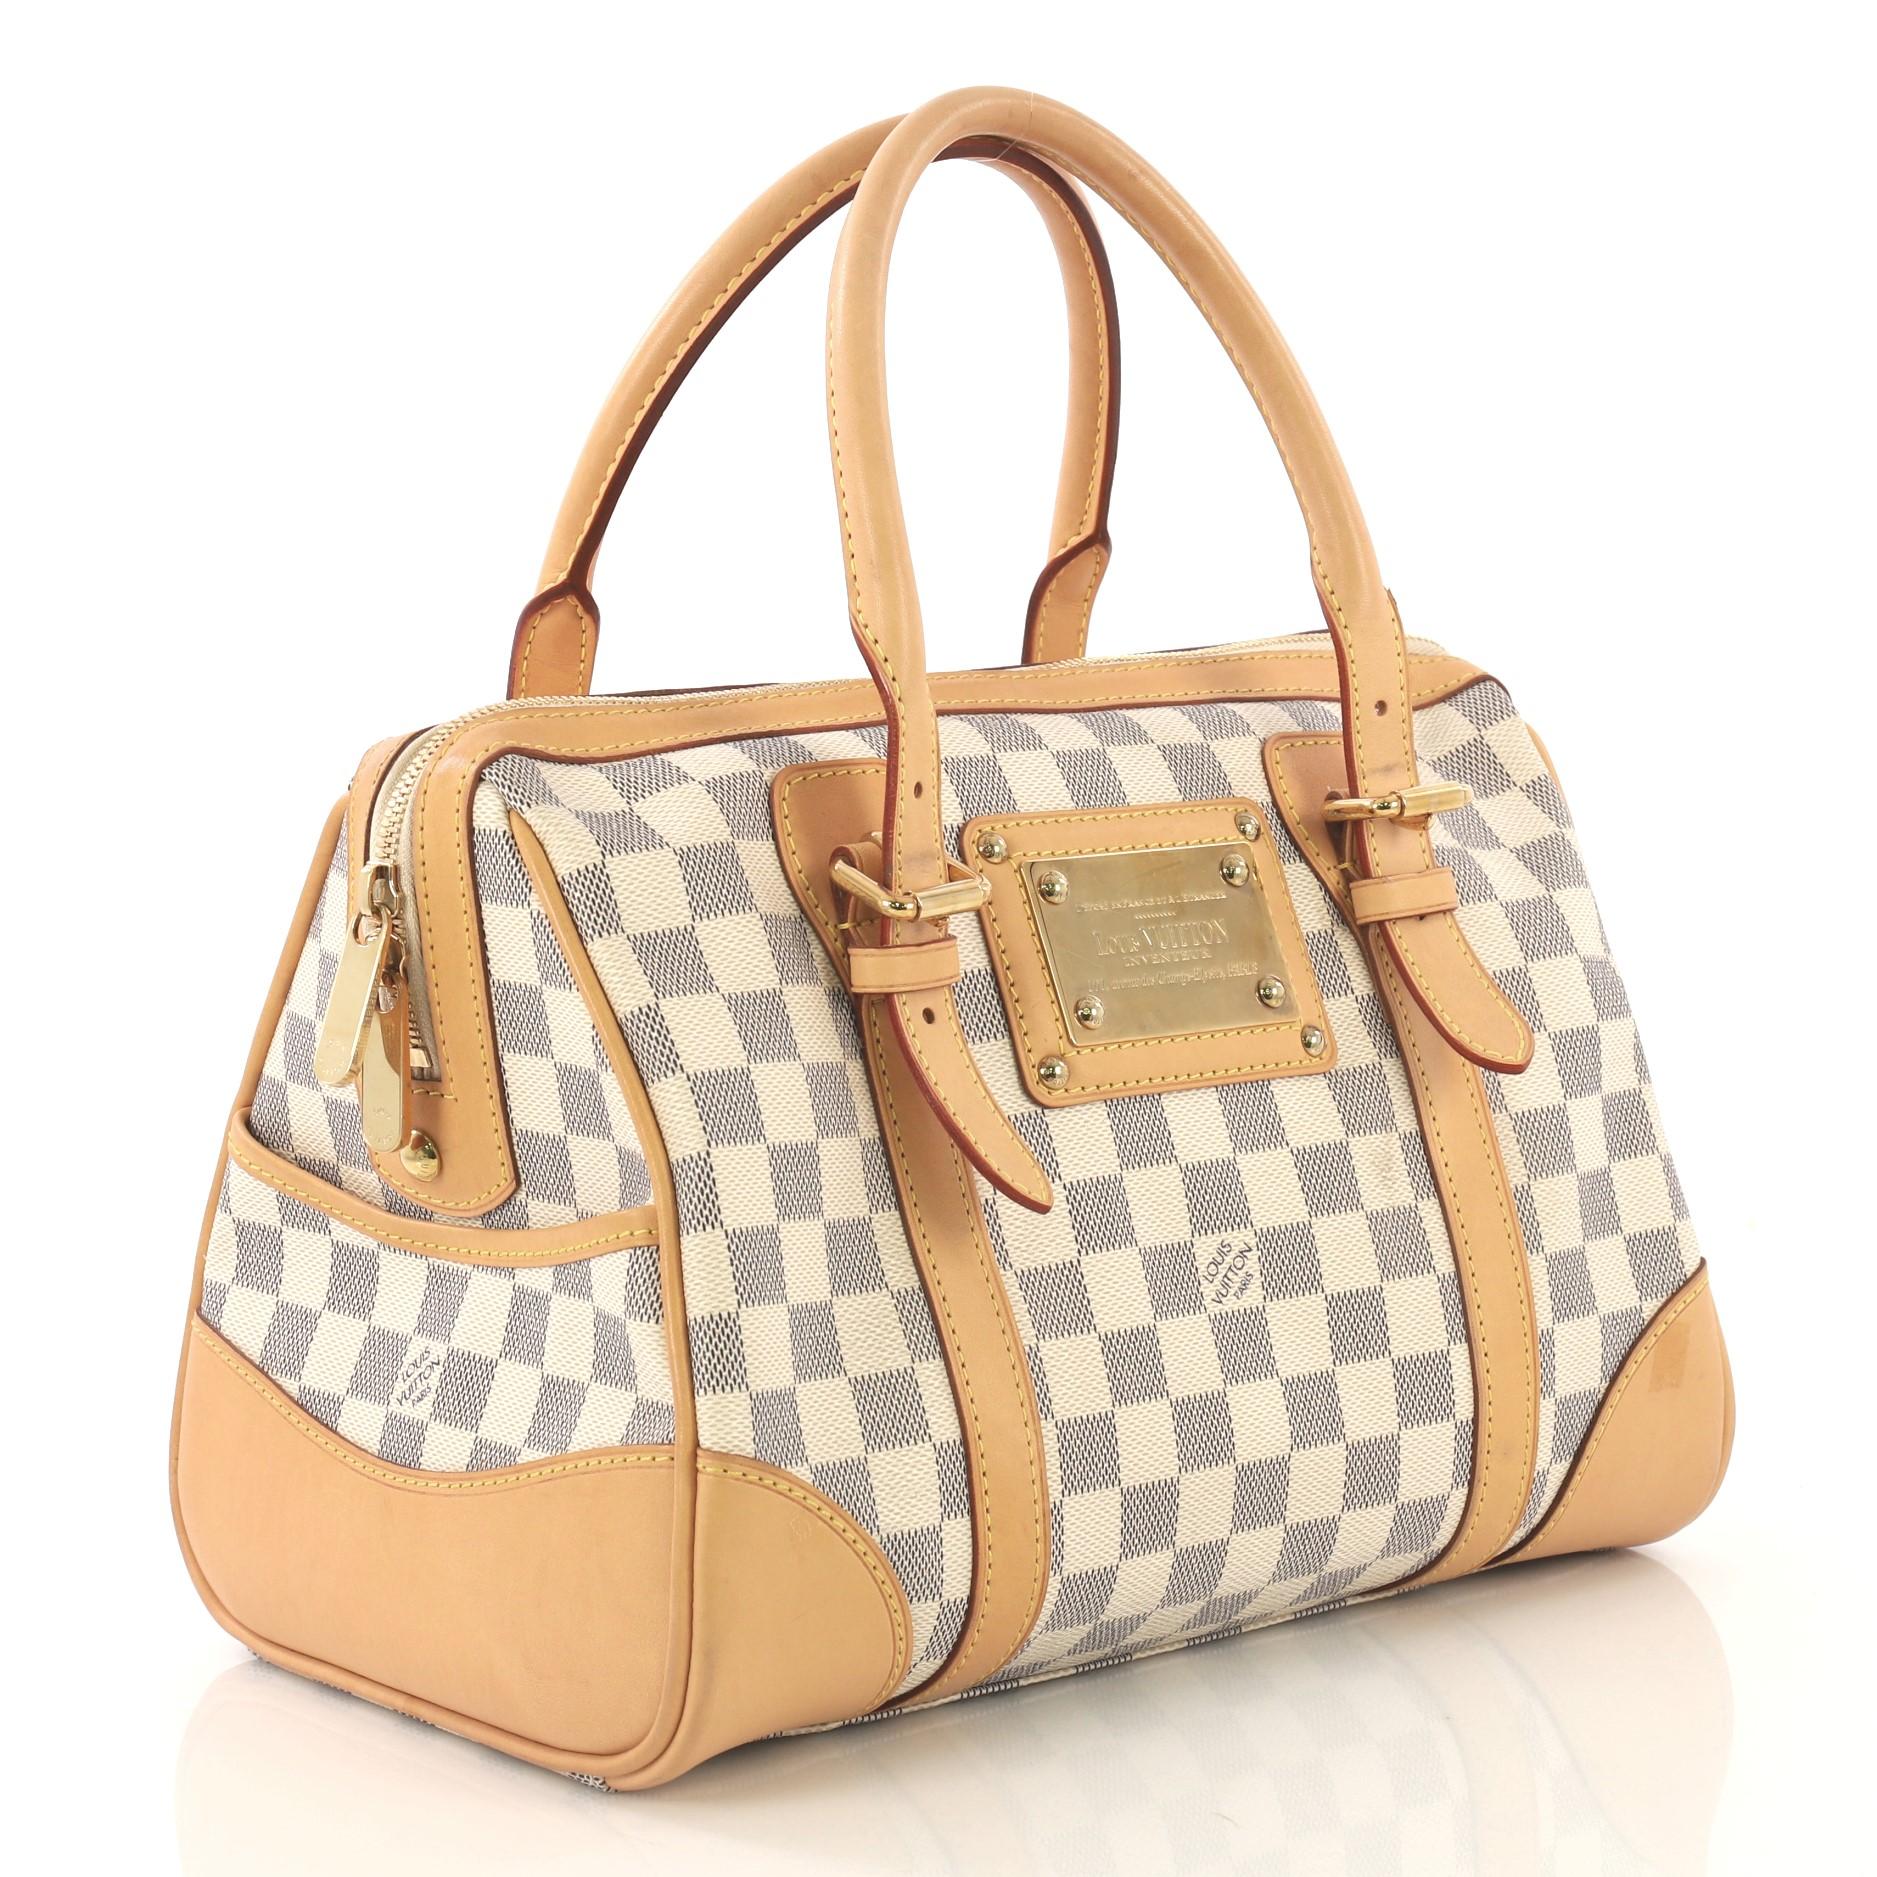 This Louis Vuitton Berkeley Handbag Damier, crafted from damier azur coated canvas, features dual rolled leather handles with belt and buckle details, exterior side pockets, and gold-tone hardware. Its top zip closure opens to a beige microfiber